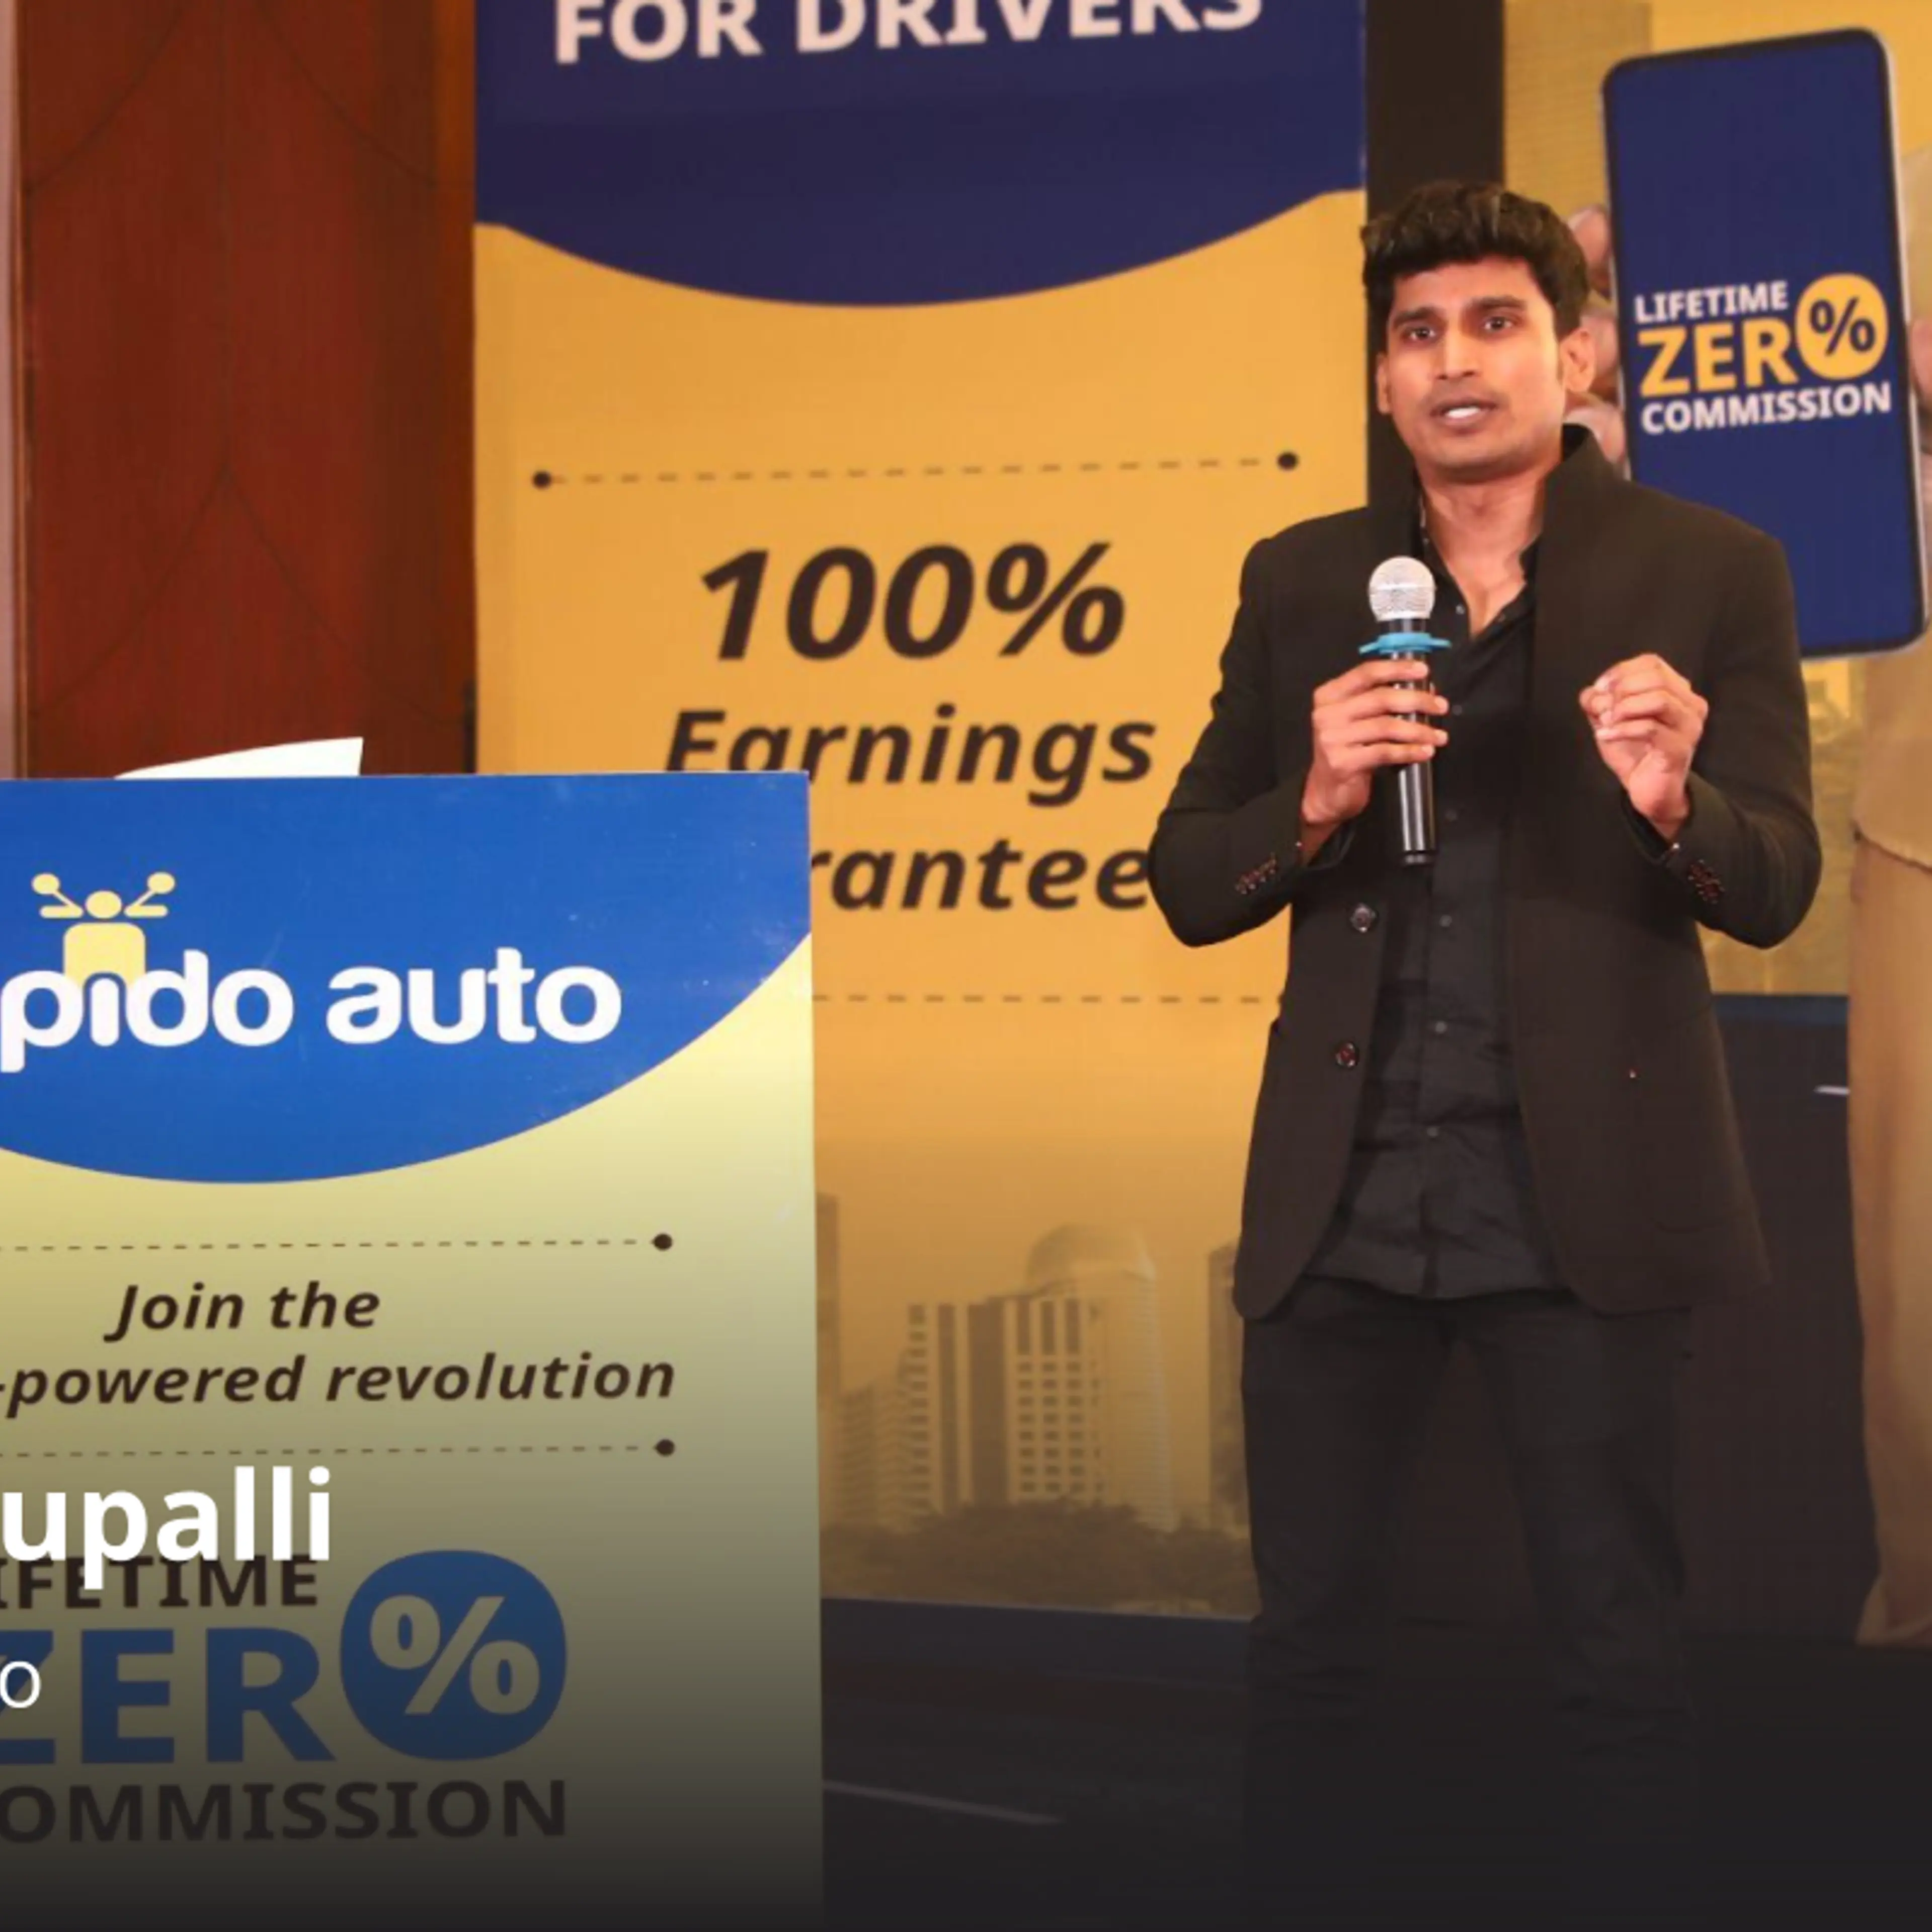 Rapido introduces SaaS model for auto driver partners as it changes commission model